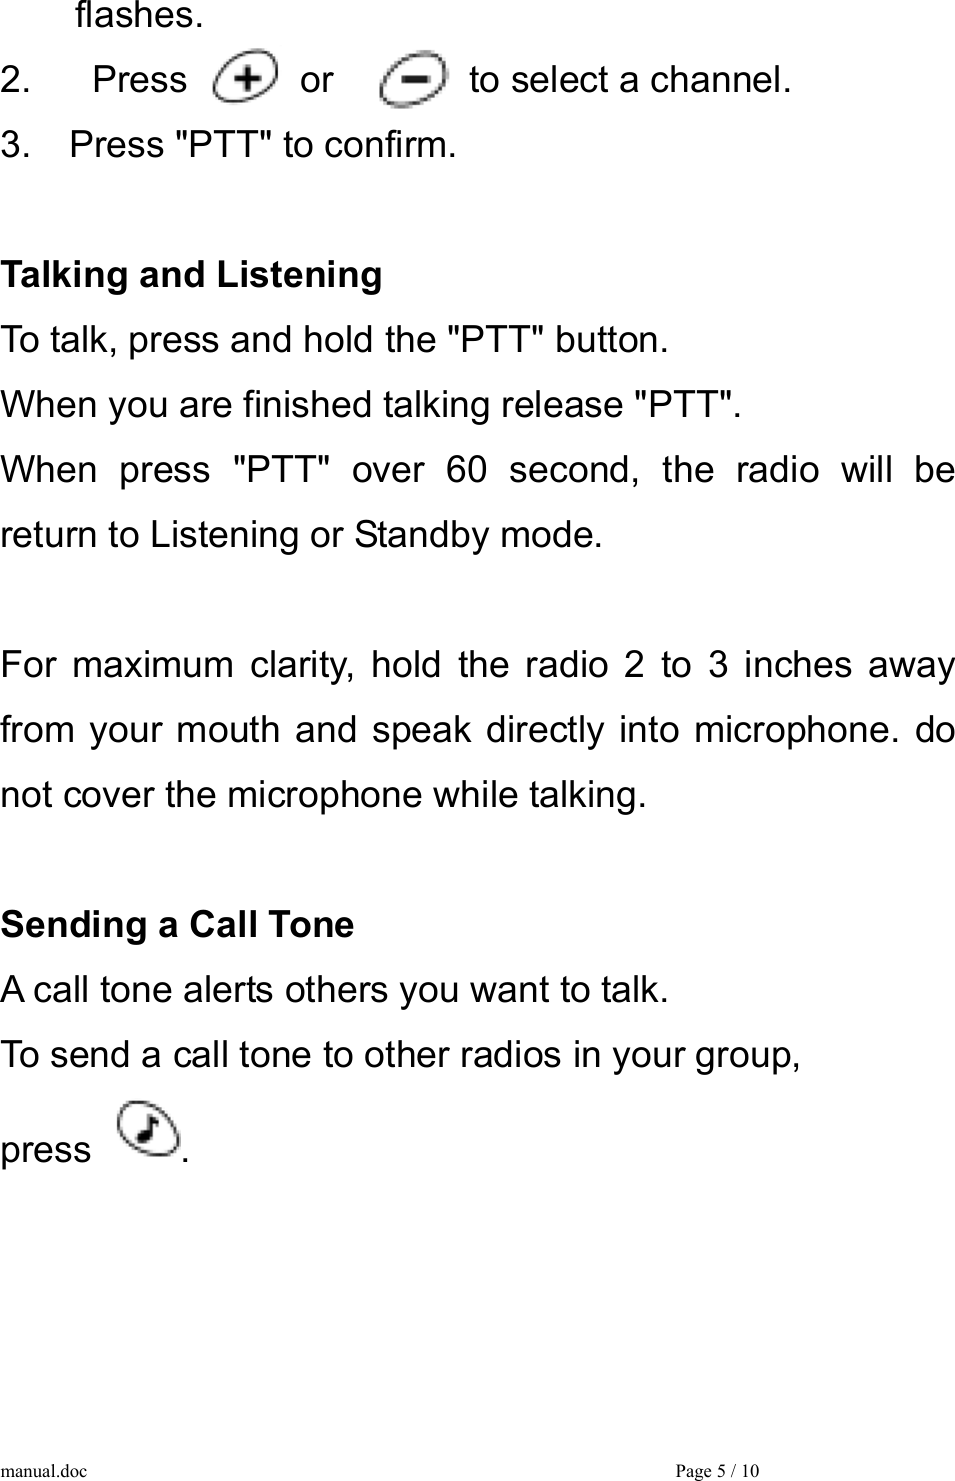  flashes. 2.    Press    or    to select a channel. 3.  Press &quot;PTT&quot; to confirm.  Talking and Listening To talk, press and hold the &quot;PTT&quot; button. When you are finished talking release &quot;PTT&quot;. When press &quot;PTT&quot; over 60 second, the radio will be return to Listening or Standby mode.  For maximum clarity, hold the radio 2 to 3 inches away from your mouth and speak directly into microphone. do not cover the microphone while talking.  Sending a Call Tone A call tone alerts others you want to talk. To send a call tone to other radios in your group,   press  .     manual.doc    Page 5 / 10 